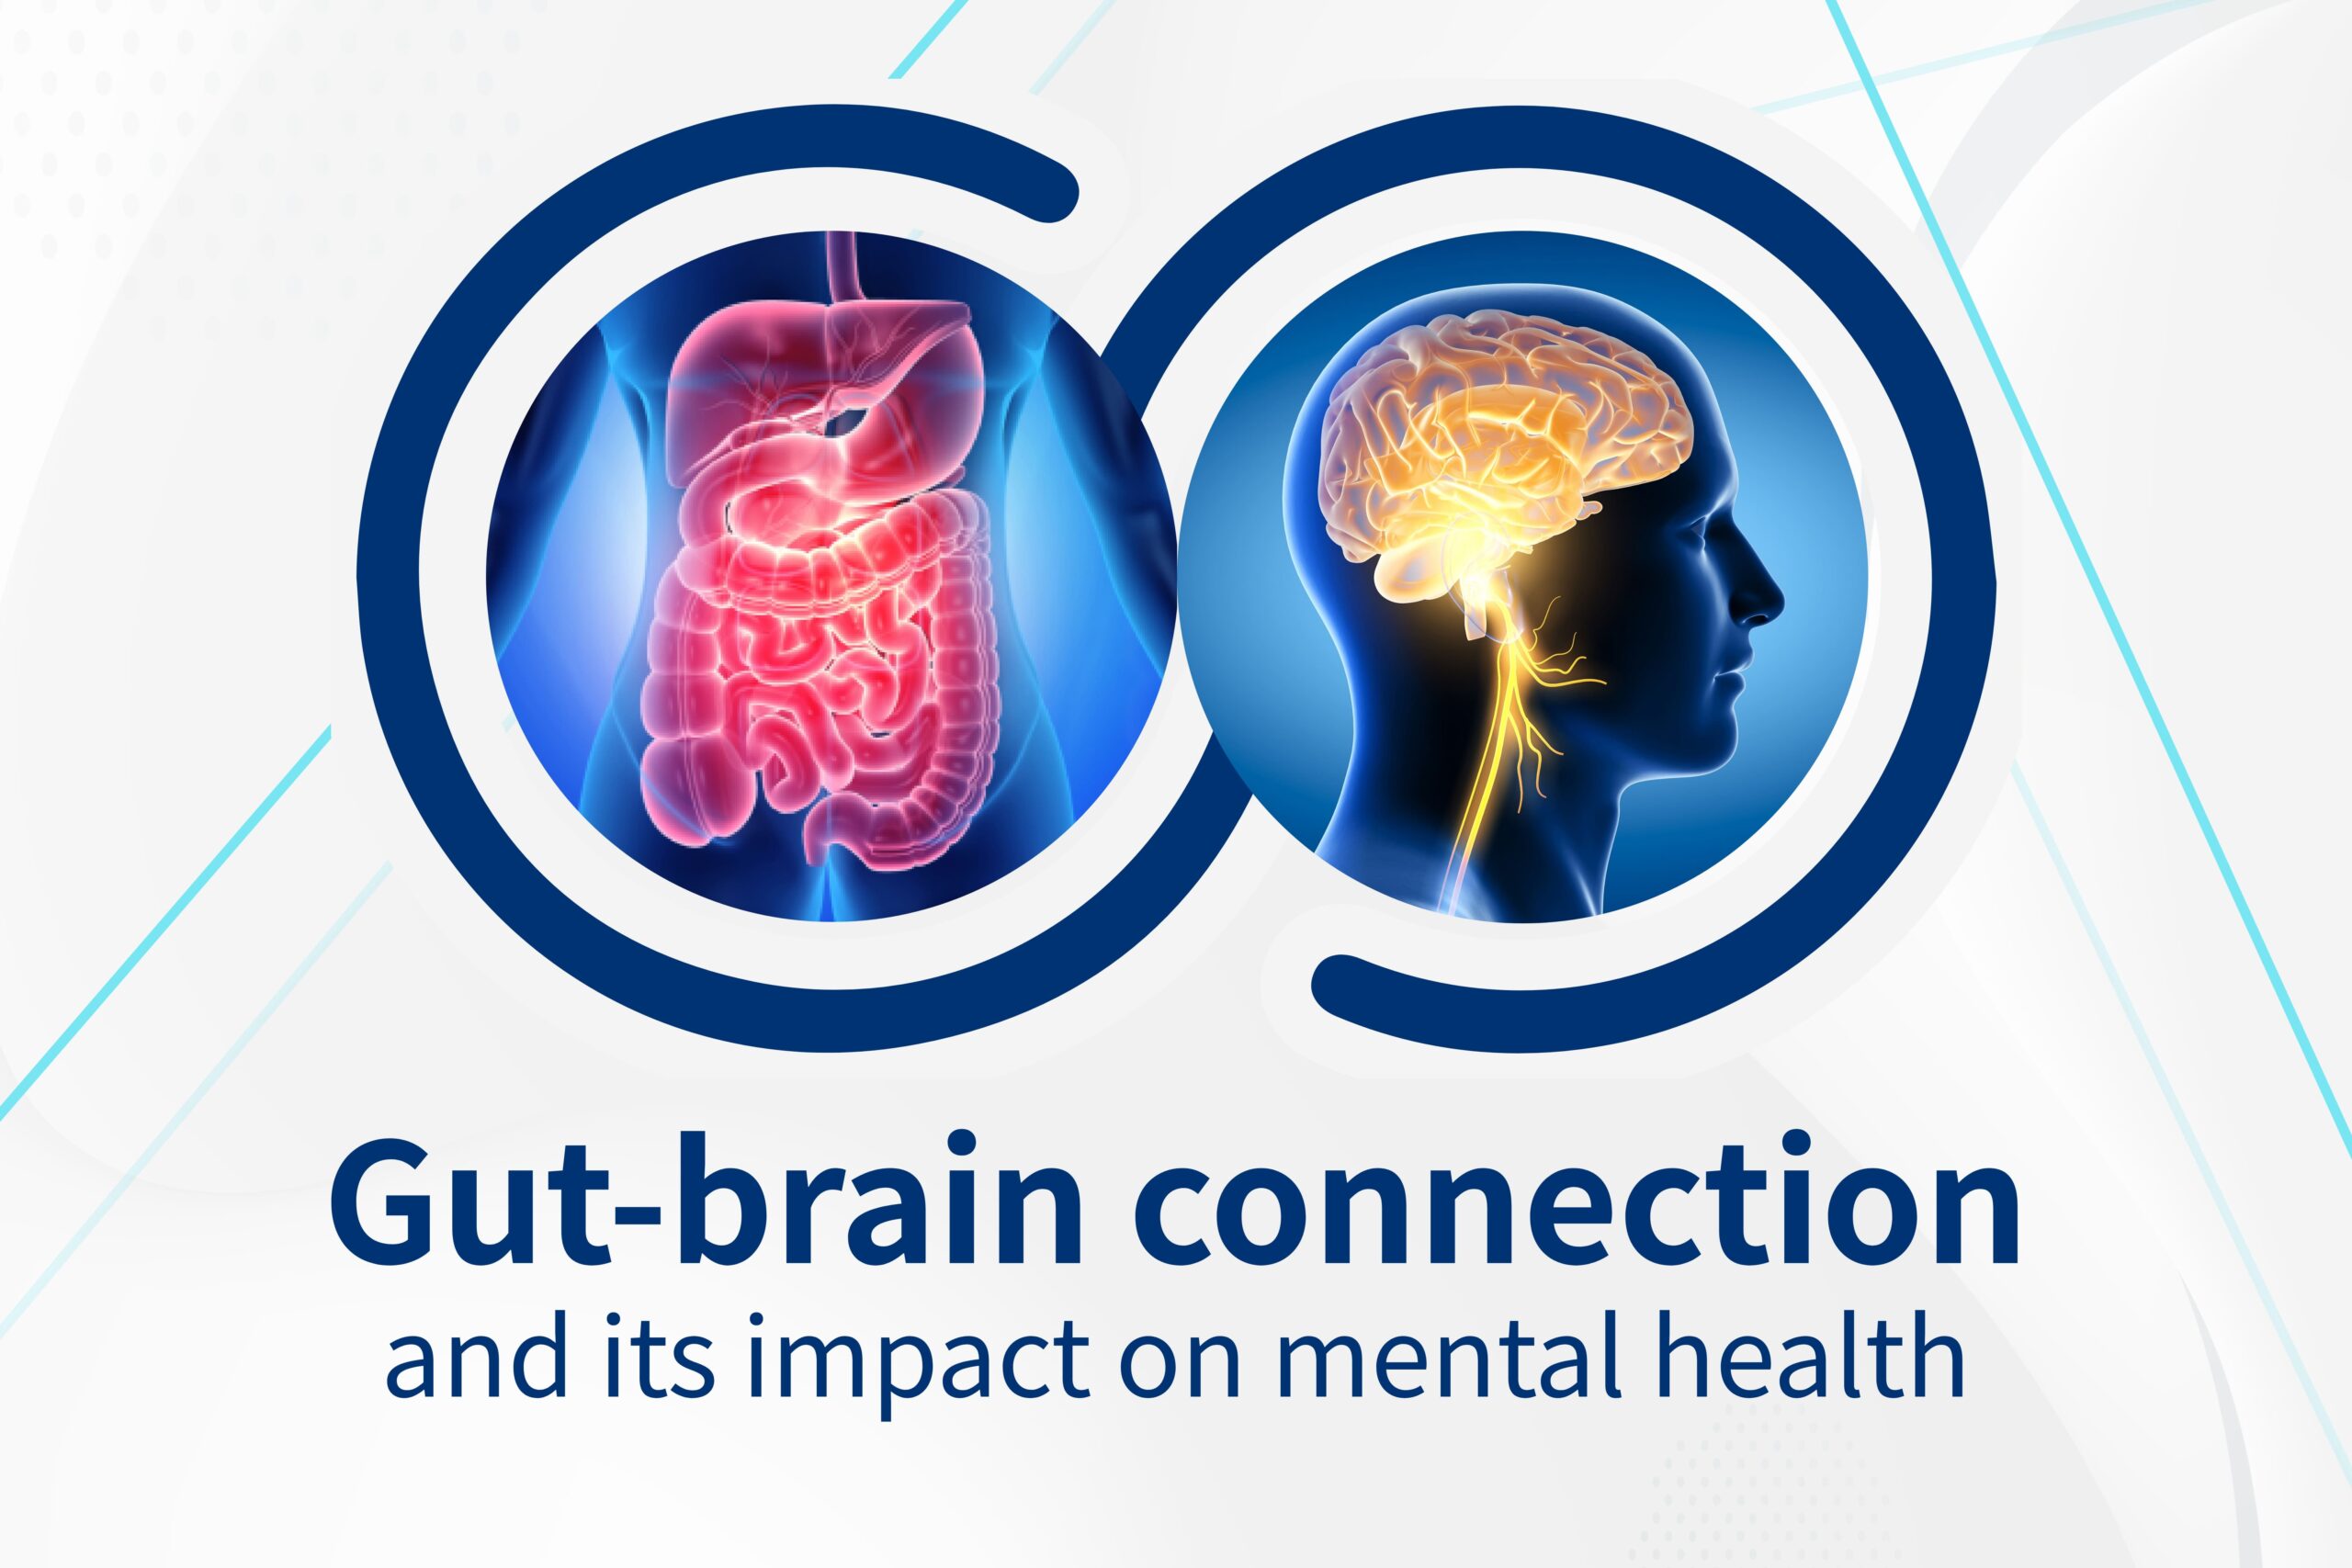 Gut brain connection and its impact on mental health